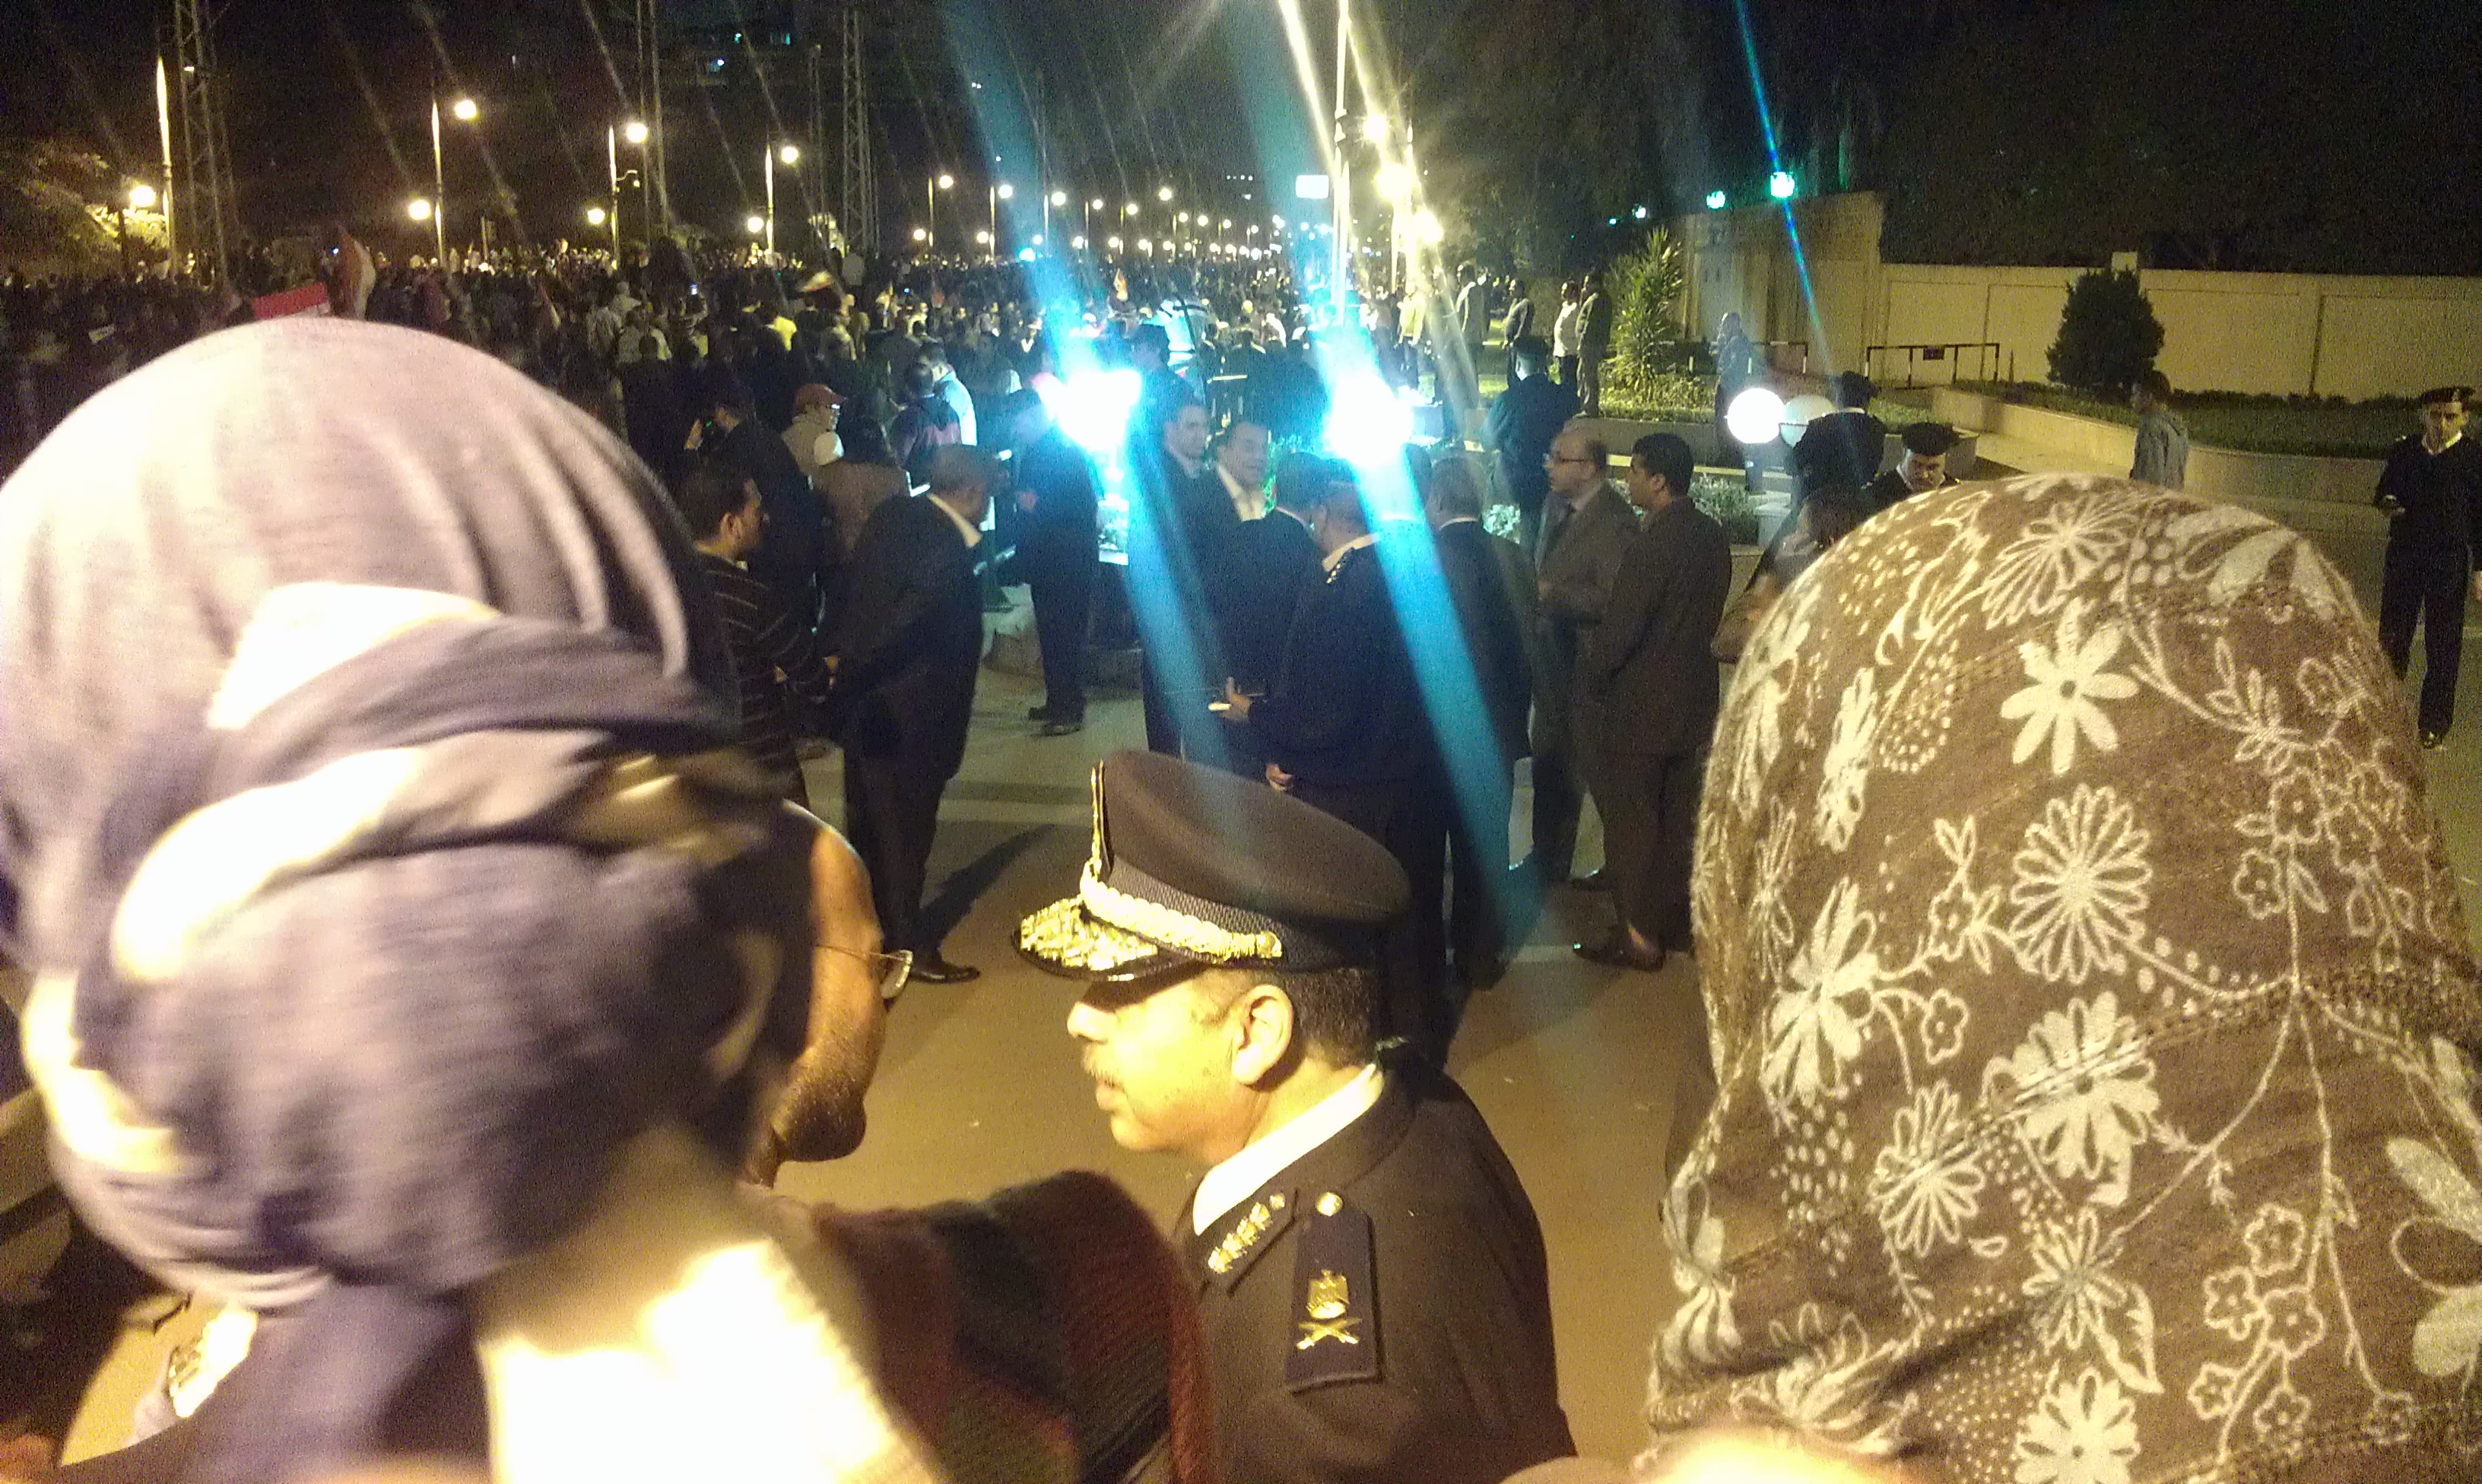 Police Officer talking to protesters.